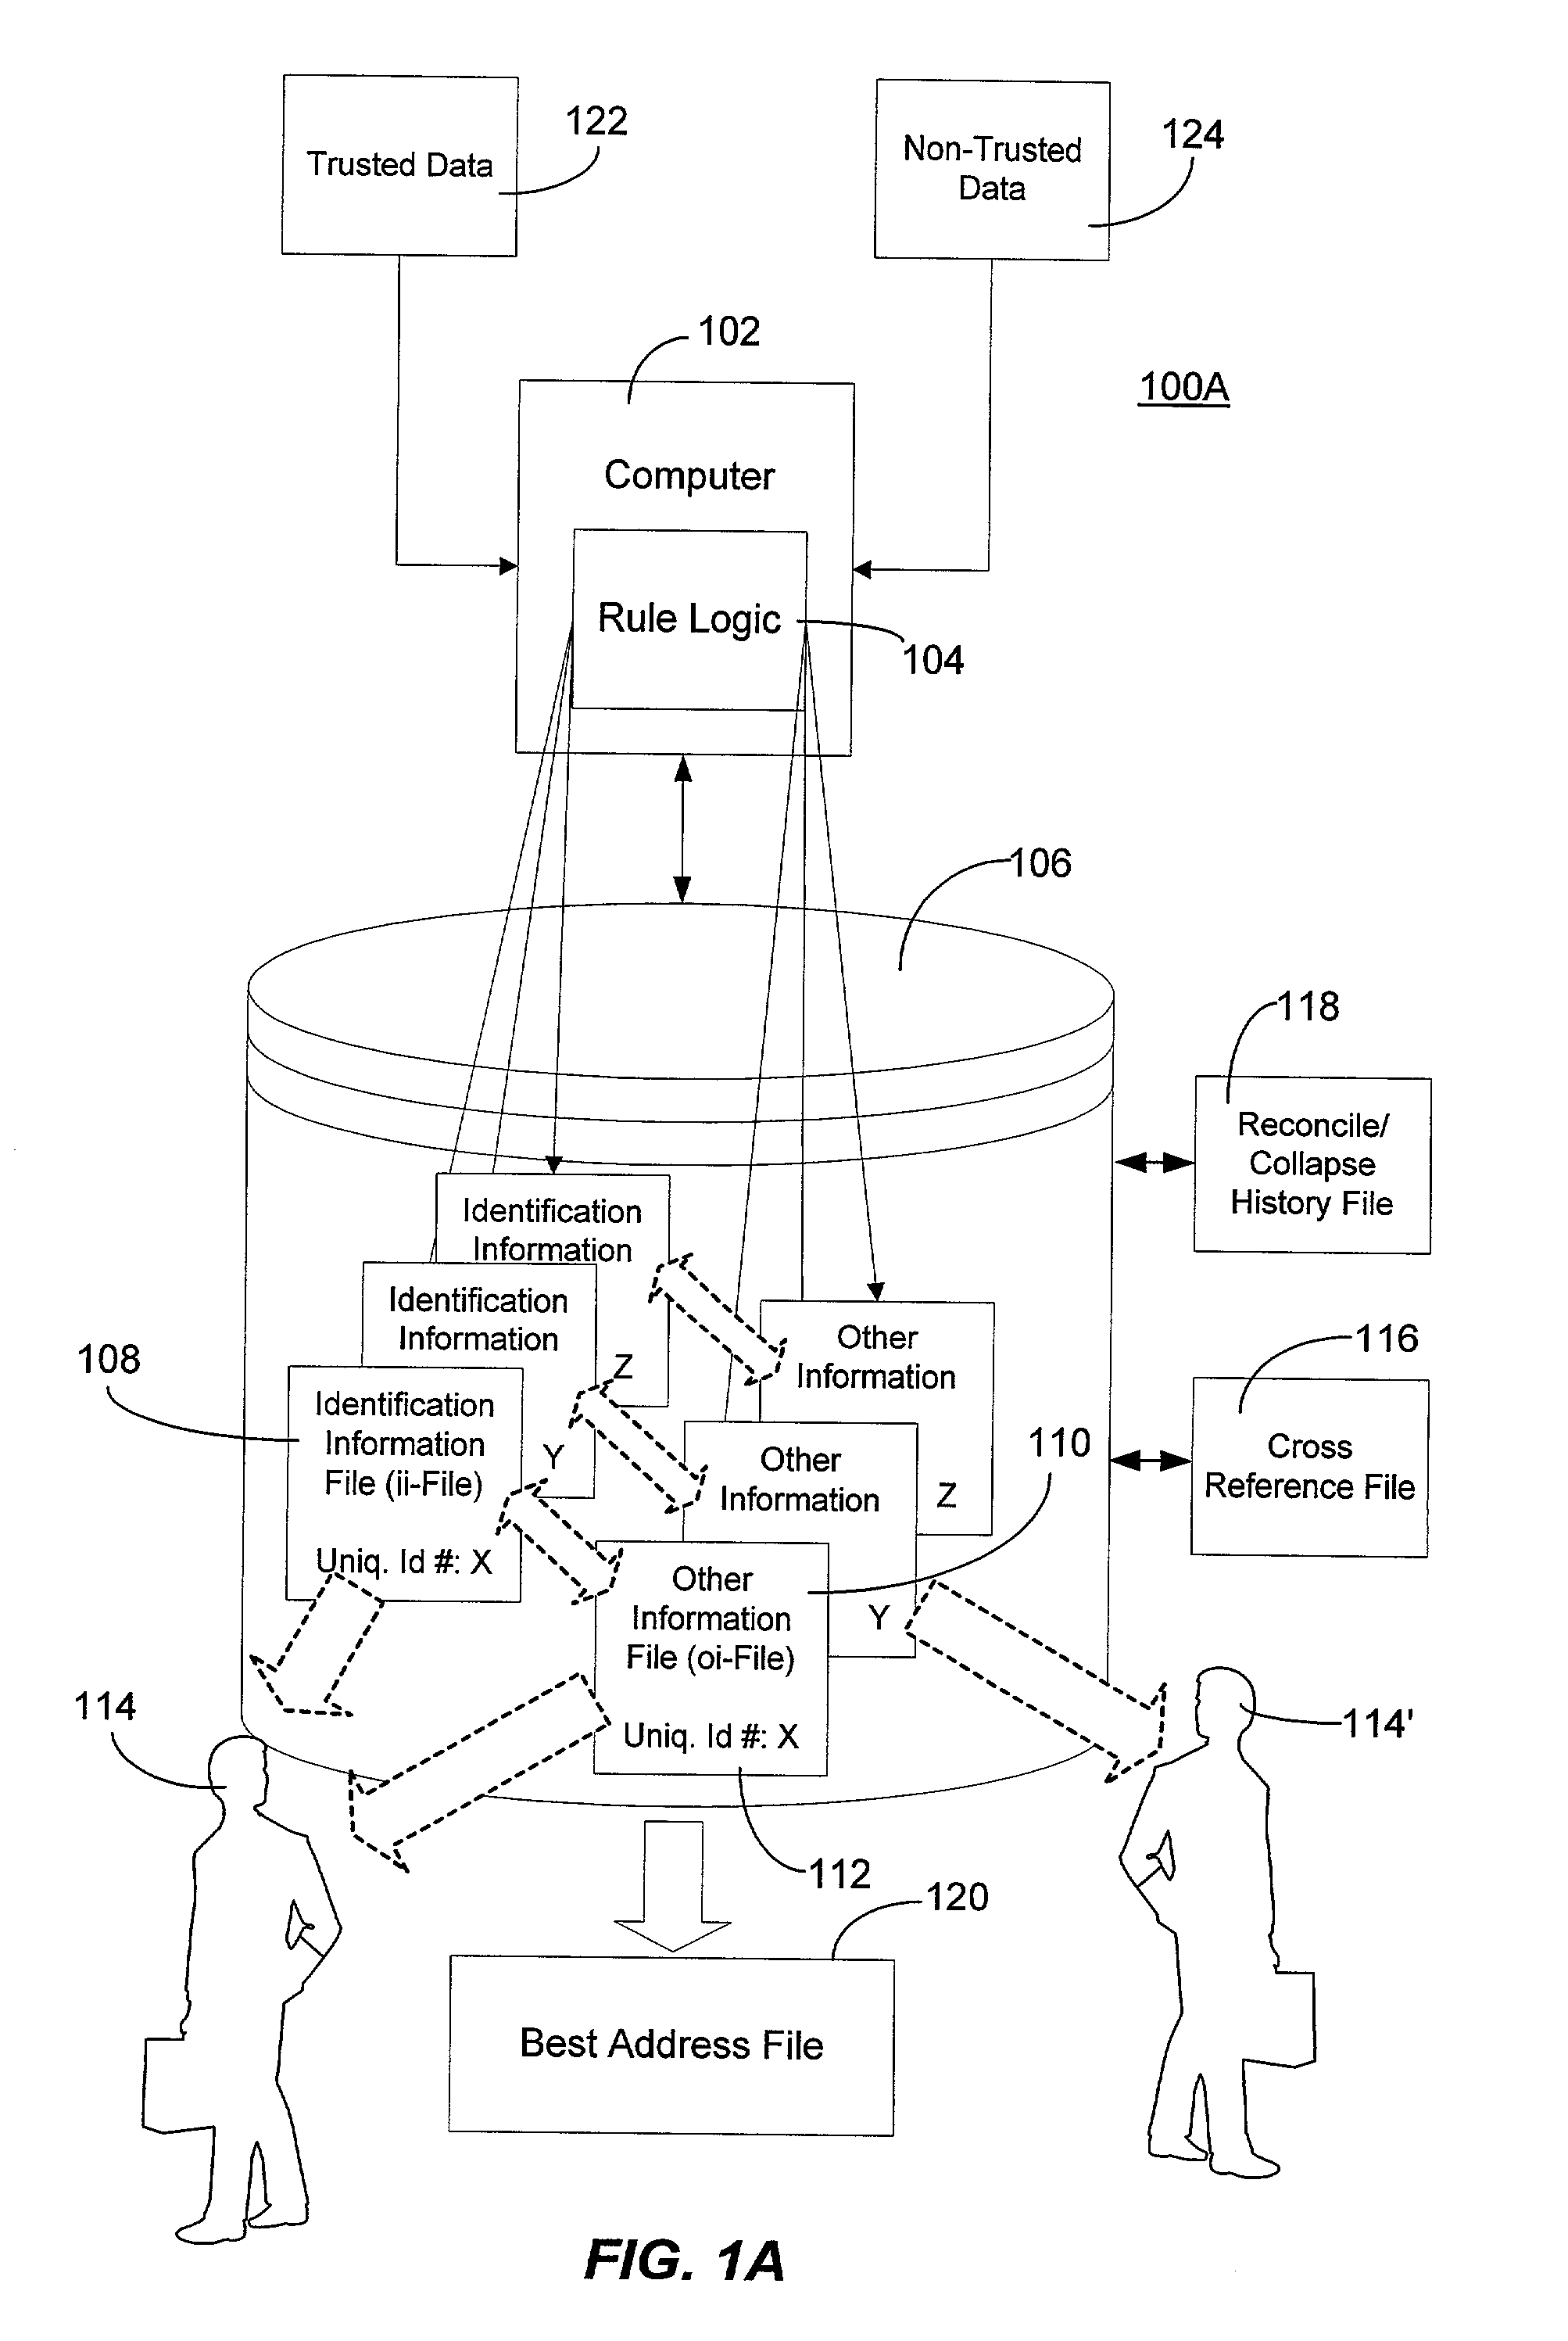 Method and system for creating and maintaining an index for tracking files relating to people